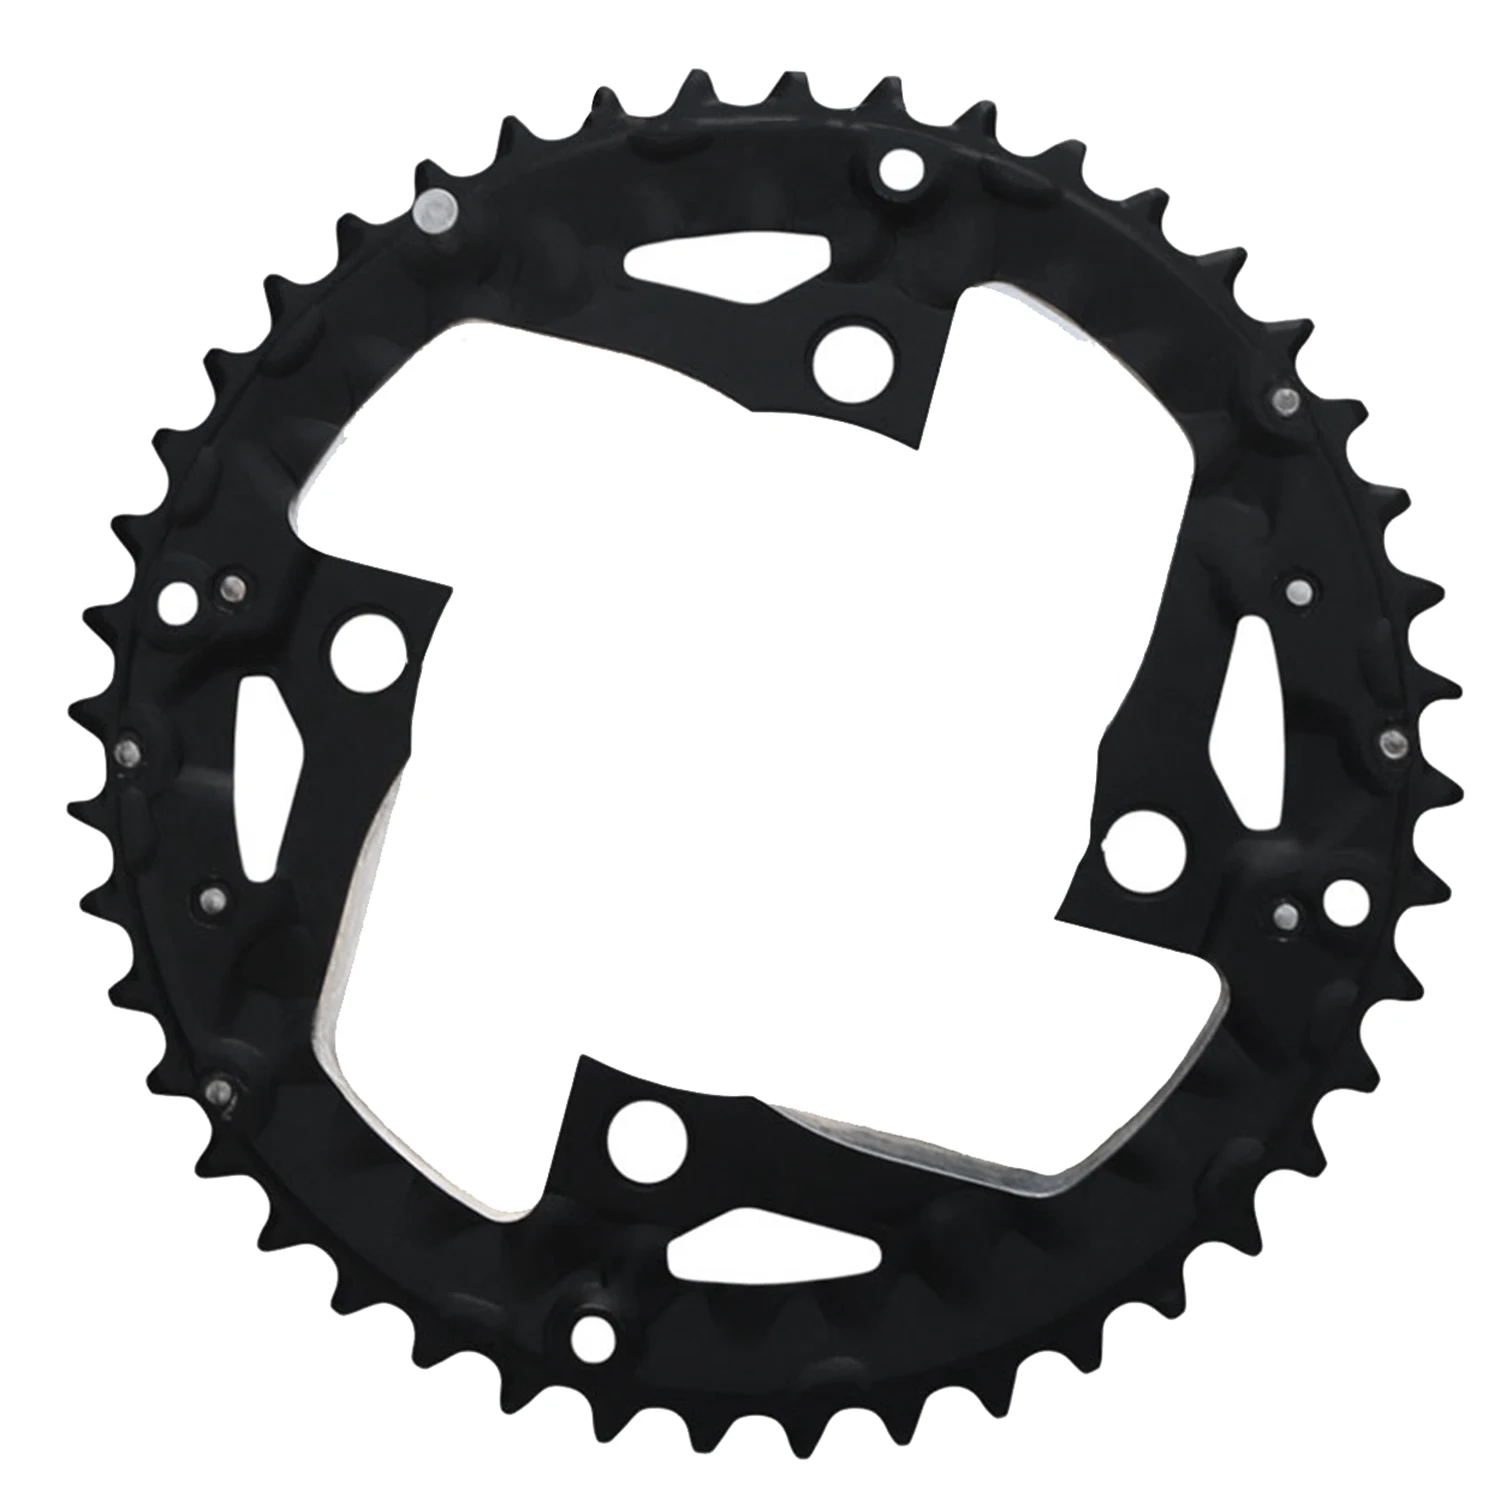 

104/64 BCD Bicycle Chainring 44T Bike Chain Ring Double/Triple Chainwheel for Mountain Bicycle Chainrings Crankset